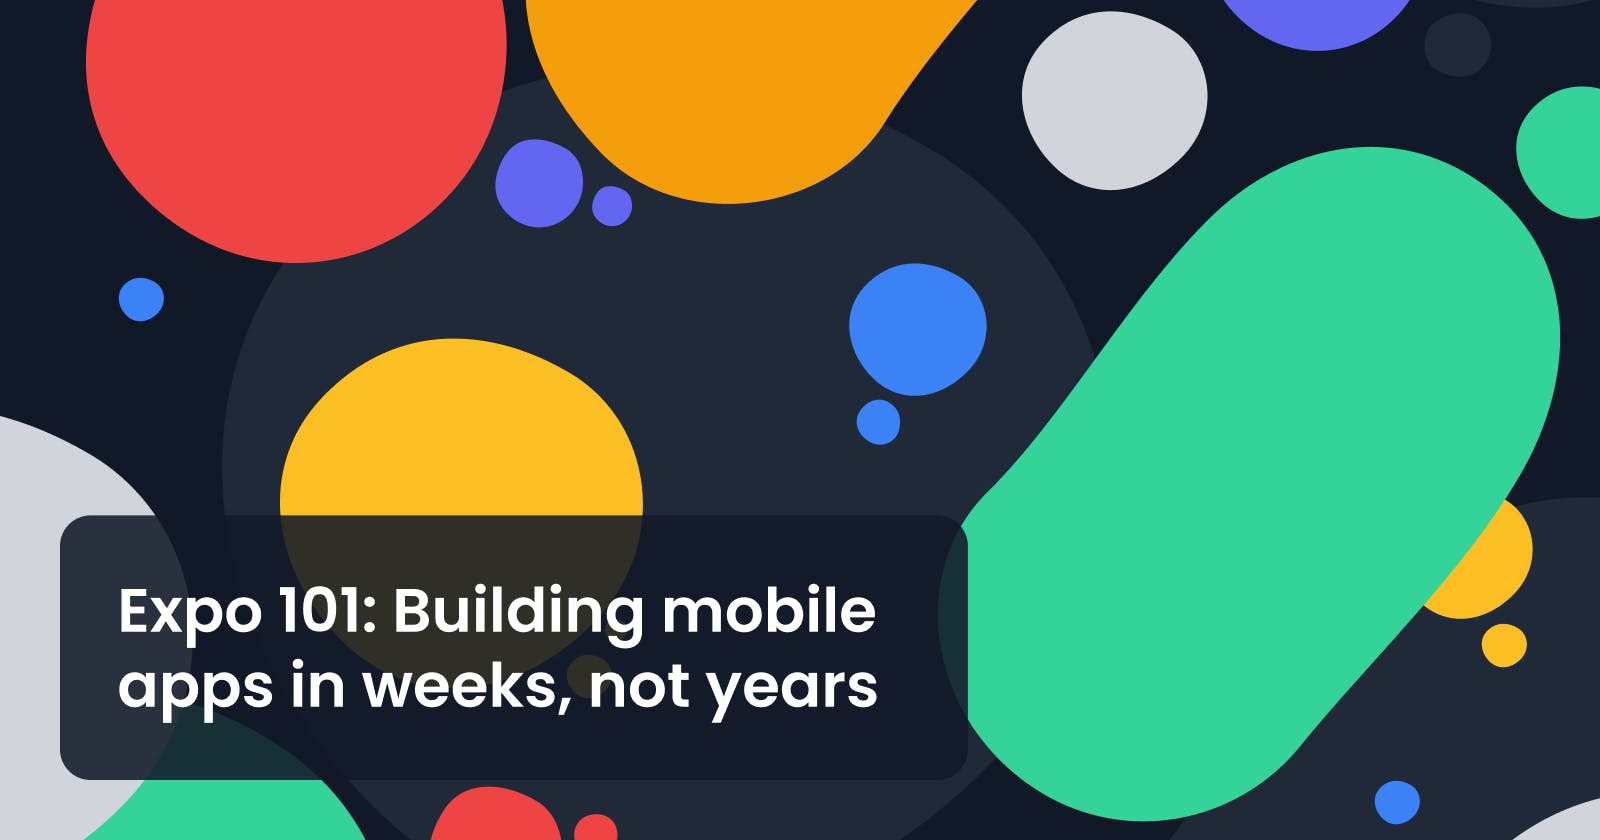 Expo 101: Building mobile apps in weeks, not years